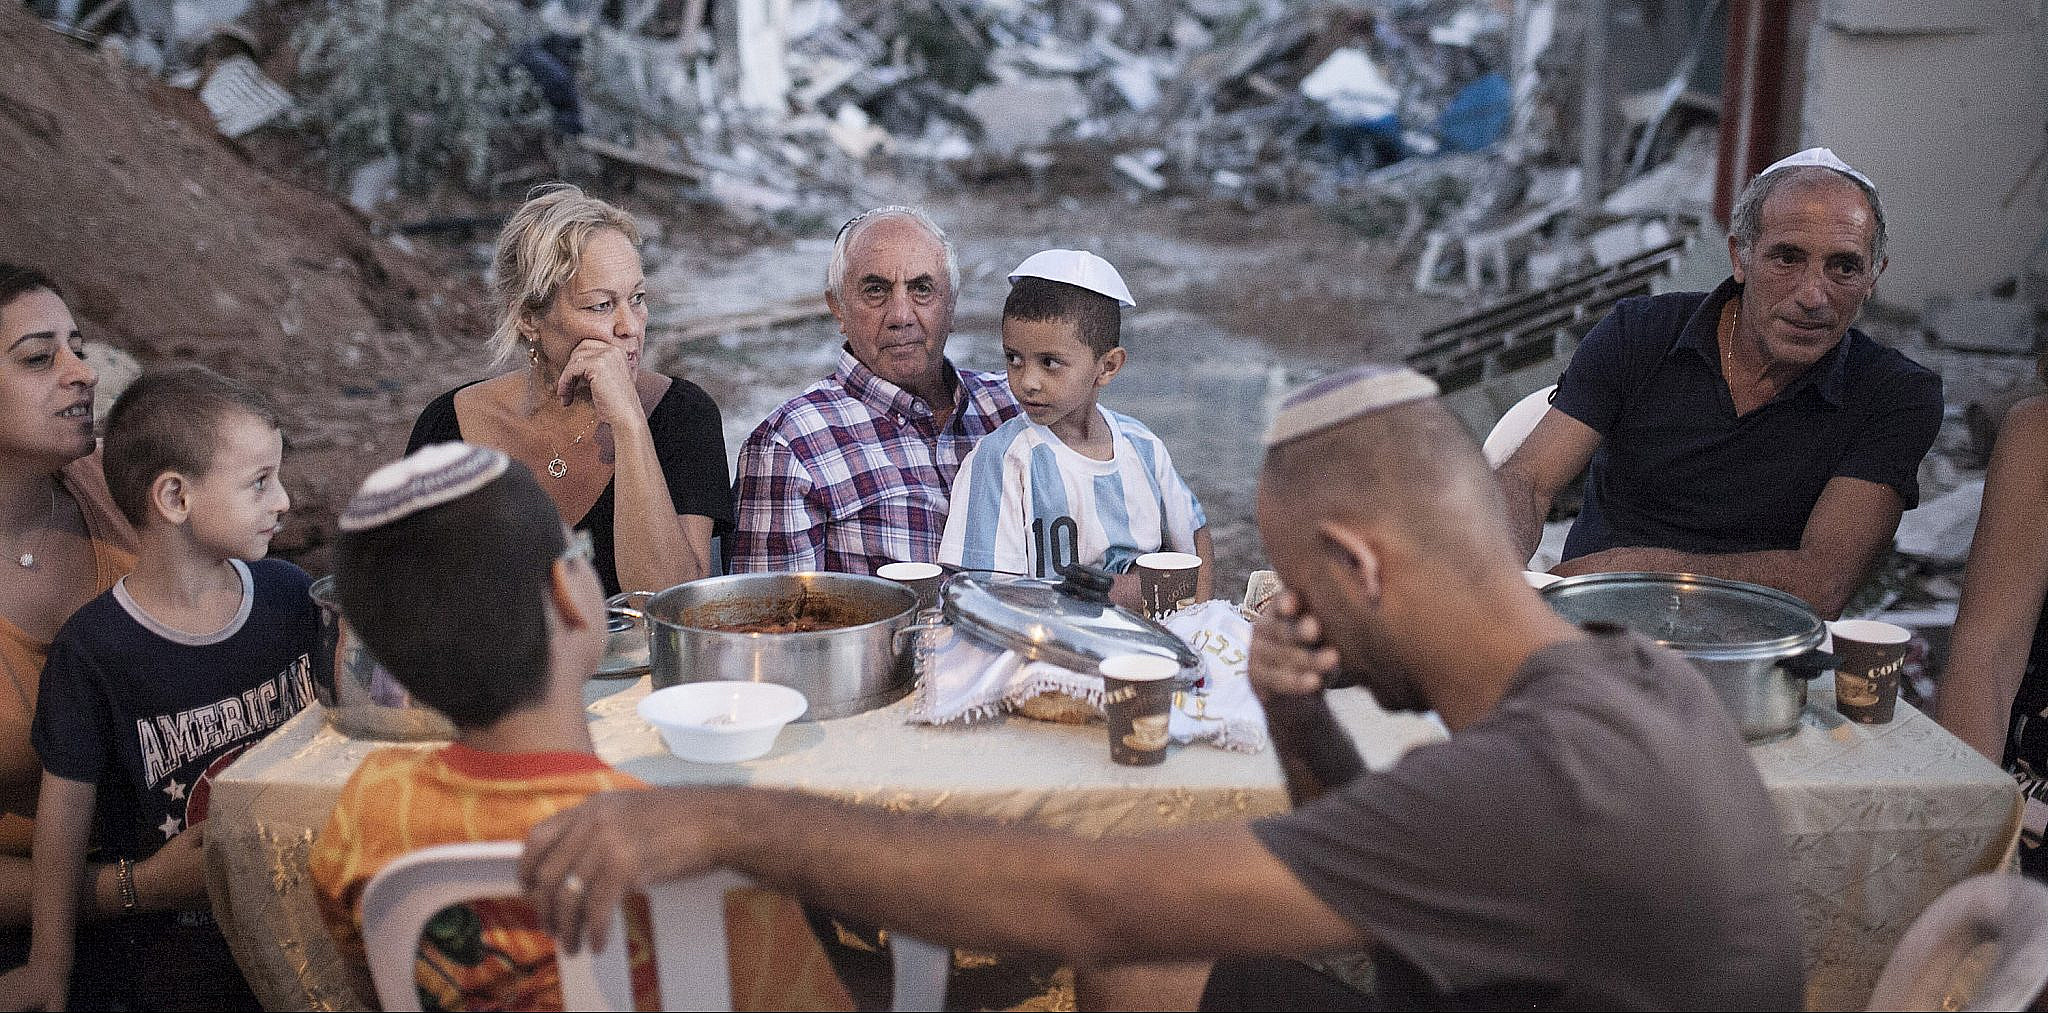 Three families hold an improvised, outdoor Shabbat dinner in the Tel Aviv neighborhood of Givat Amal. Their homes were demolished following a years-long struggle against eviction without proper compensation, September 19, 2014. (Shiraz Grinbaum/Activestills.org)